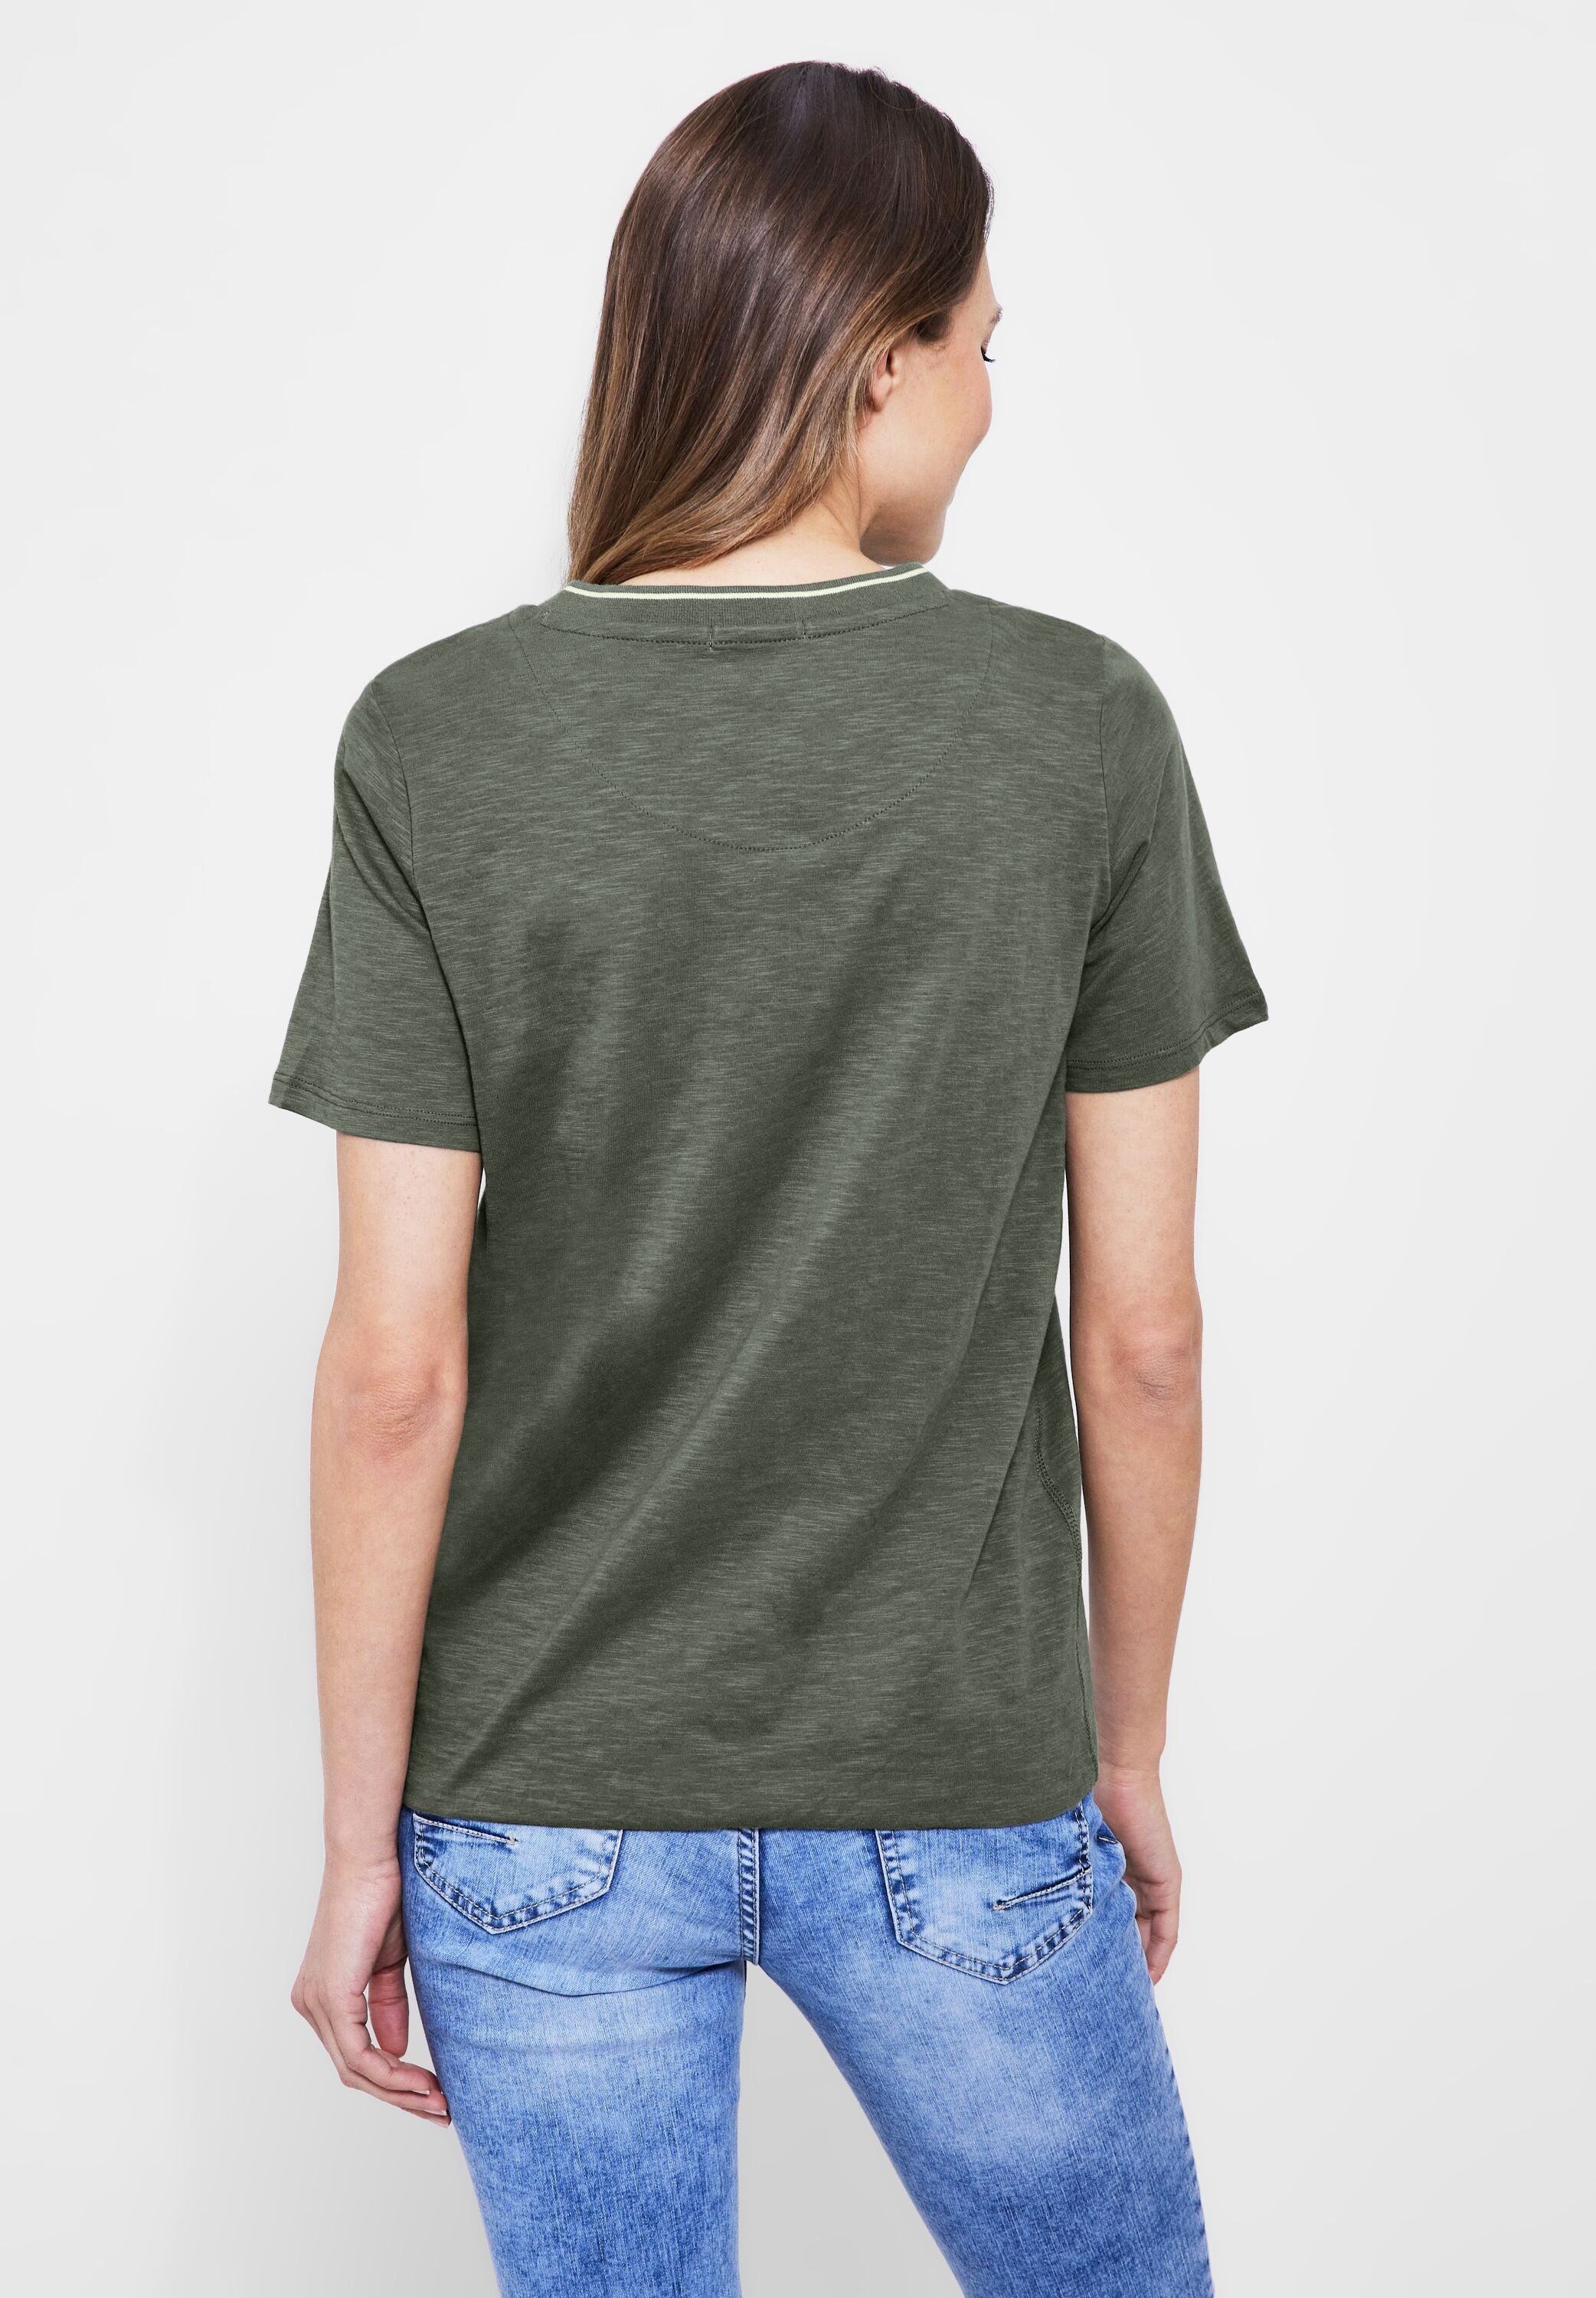 Cecil 3/4-Arm-Shirt desert green olive in Unifarbe